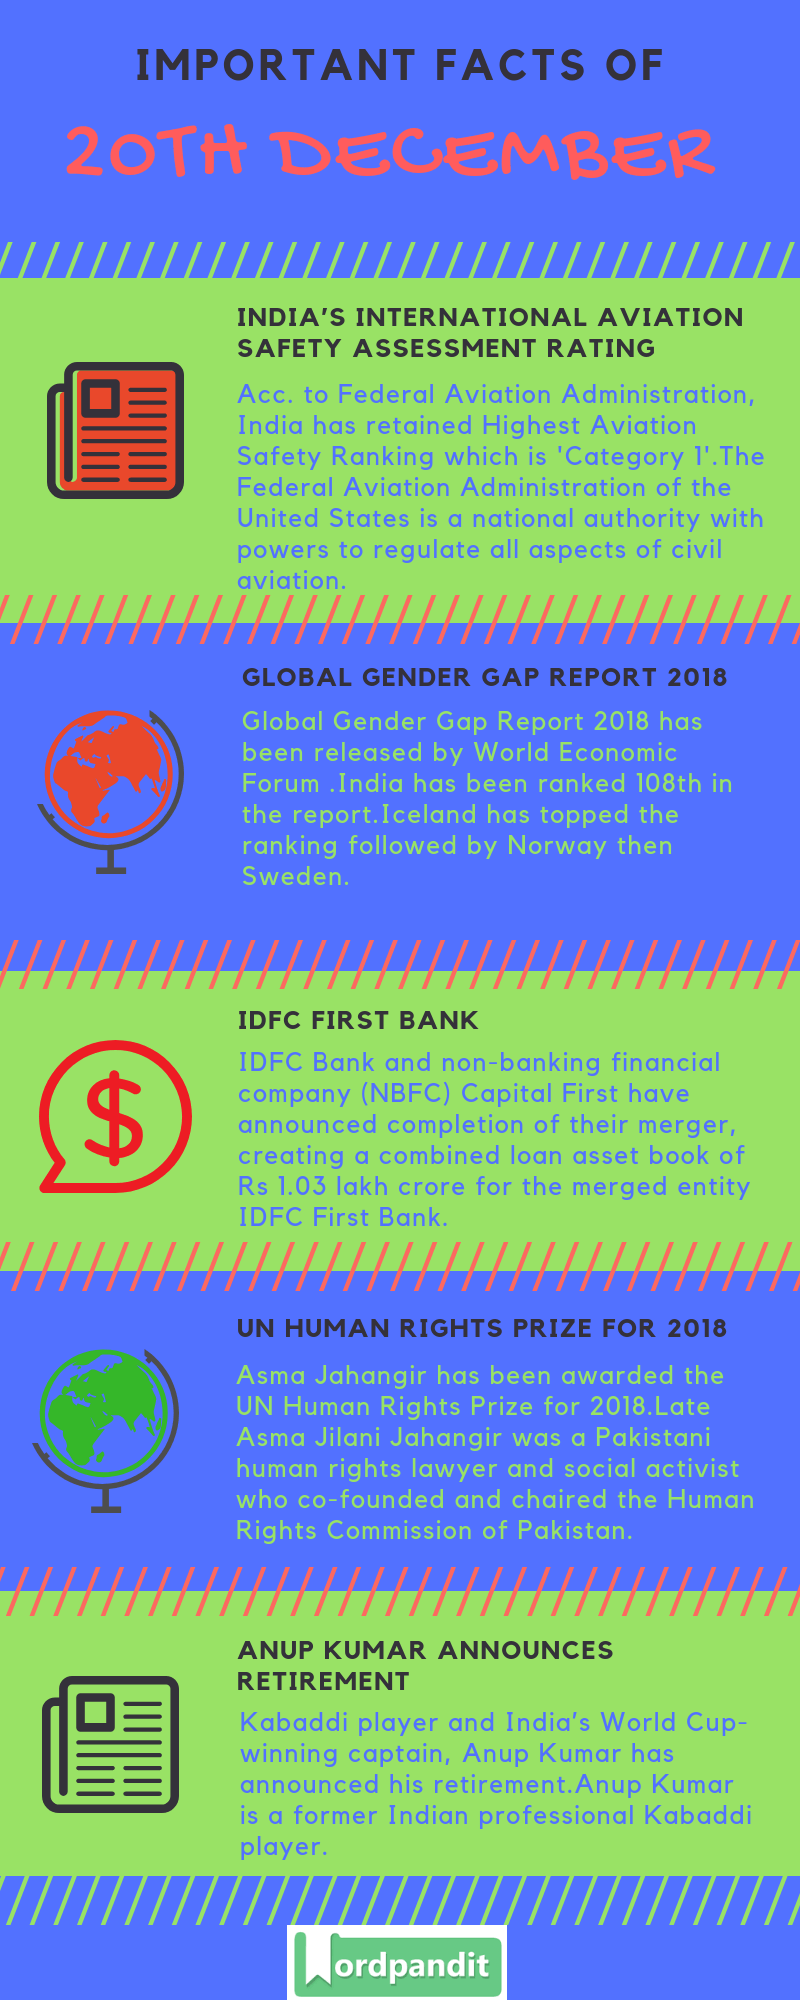 Daily Current Affairs 20 December 2018 Current Affairs Quiz 20 December 2018 Current Affairs Infographic